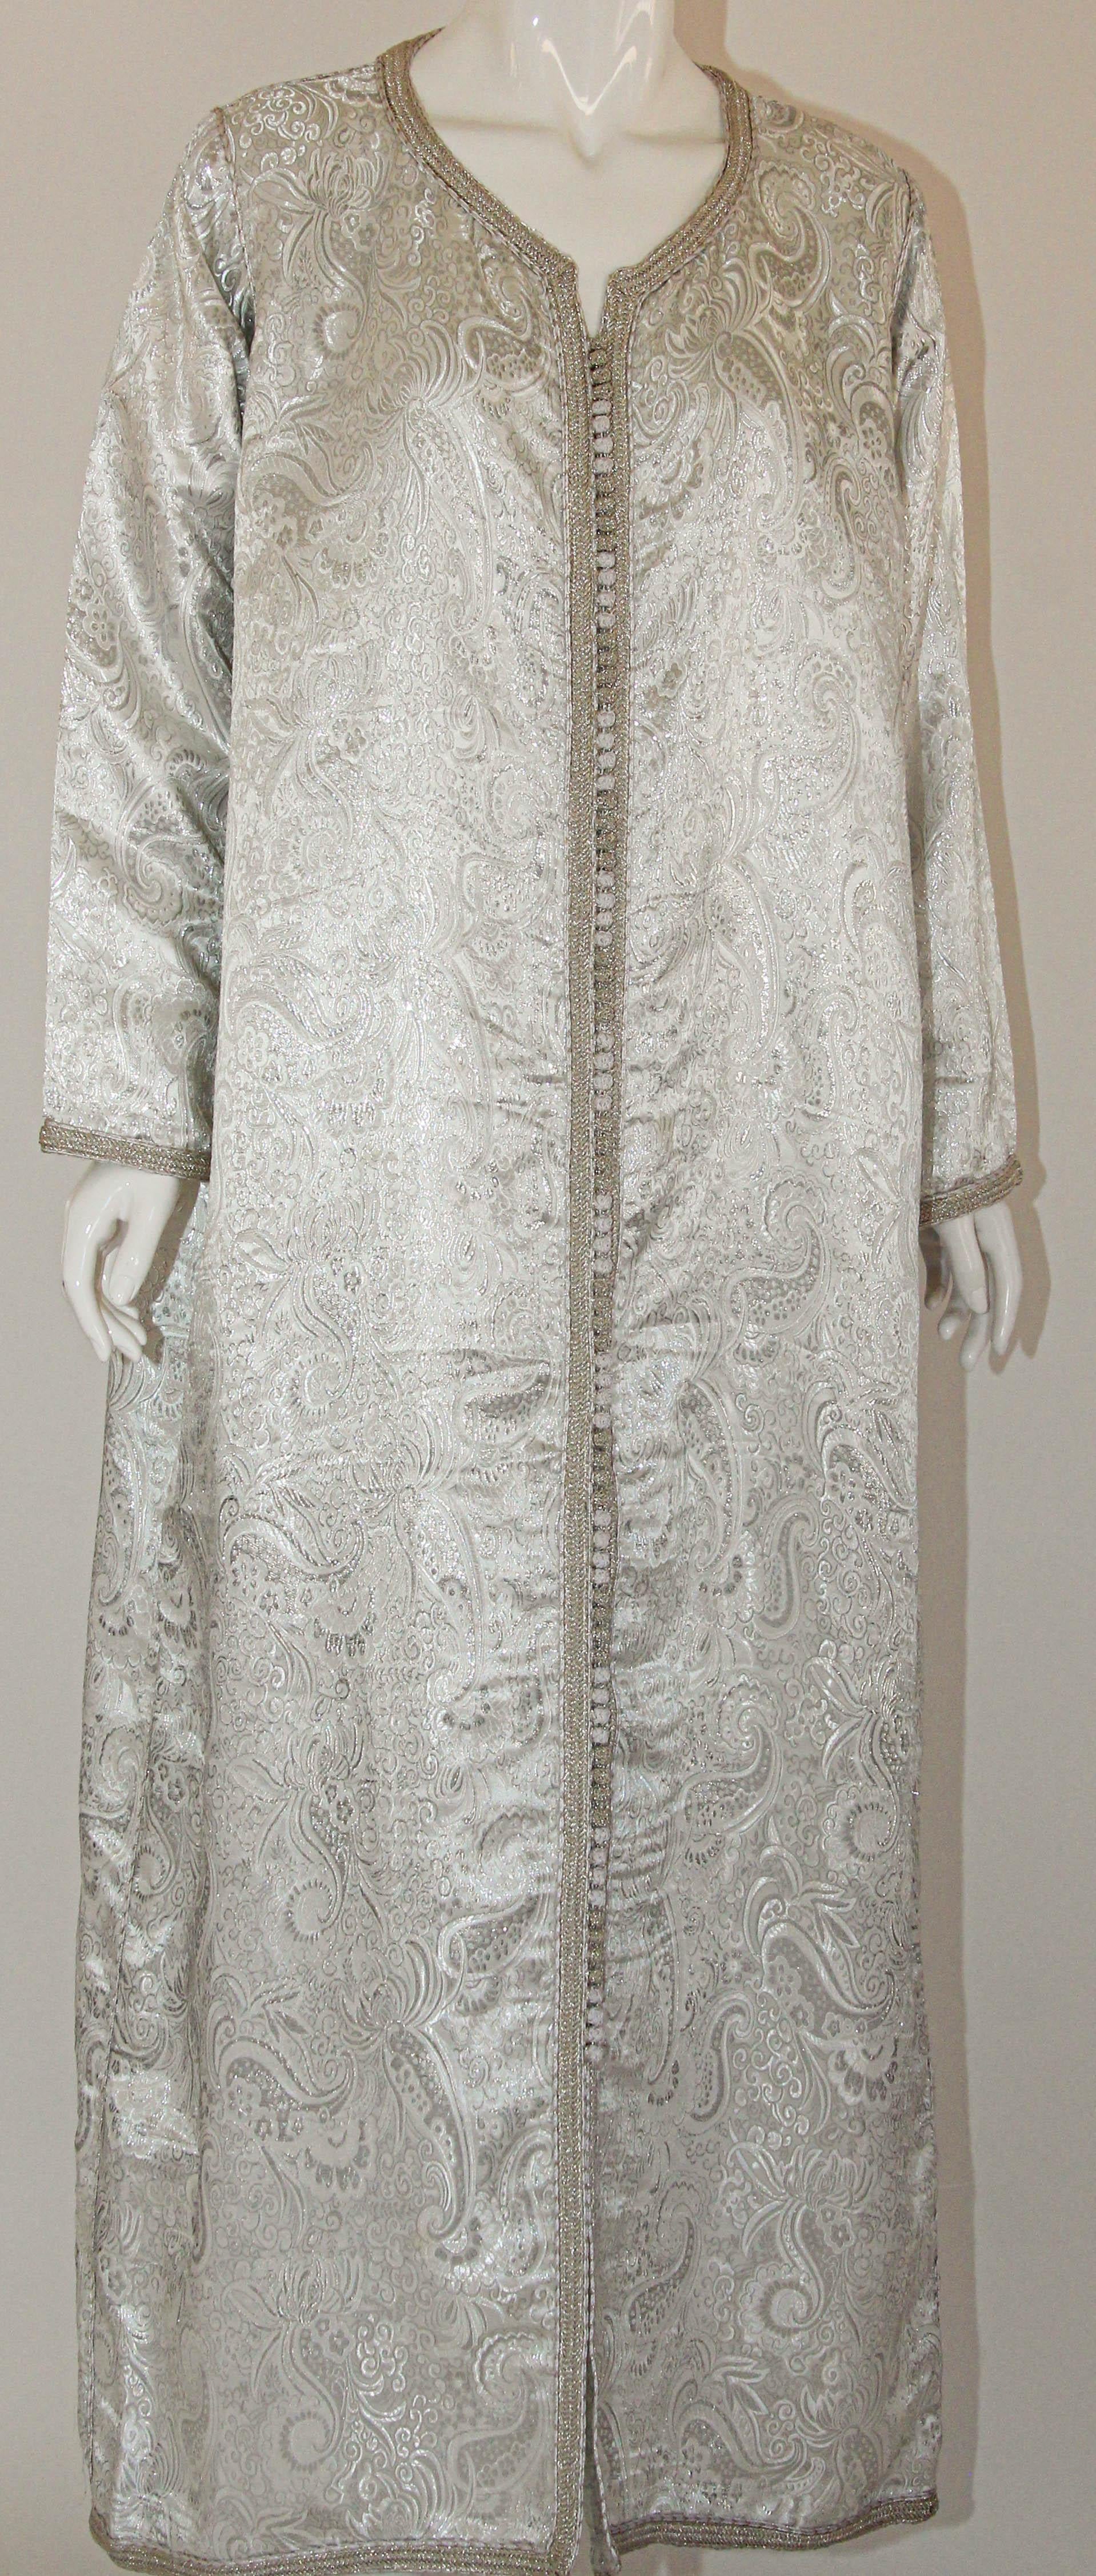 1970s Moroccan Vintage Caftan, Silver Damask Kaftan Bohemian Maxi Dress.
This 1970s Moroccan vintage caftan is a timeless and captivating piece of clothing that embodies the essence of Moroccan culture and style from that era.
This stunning caftan